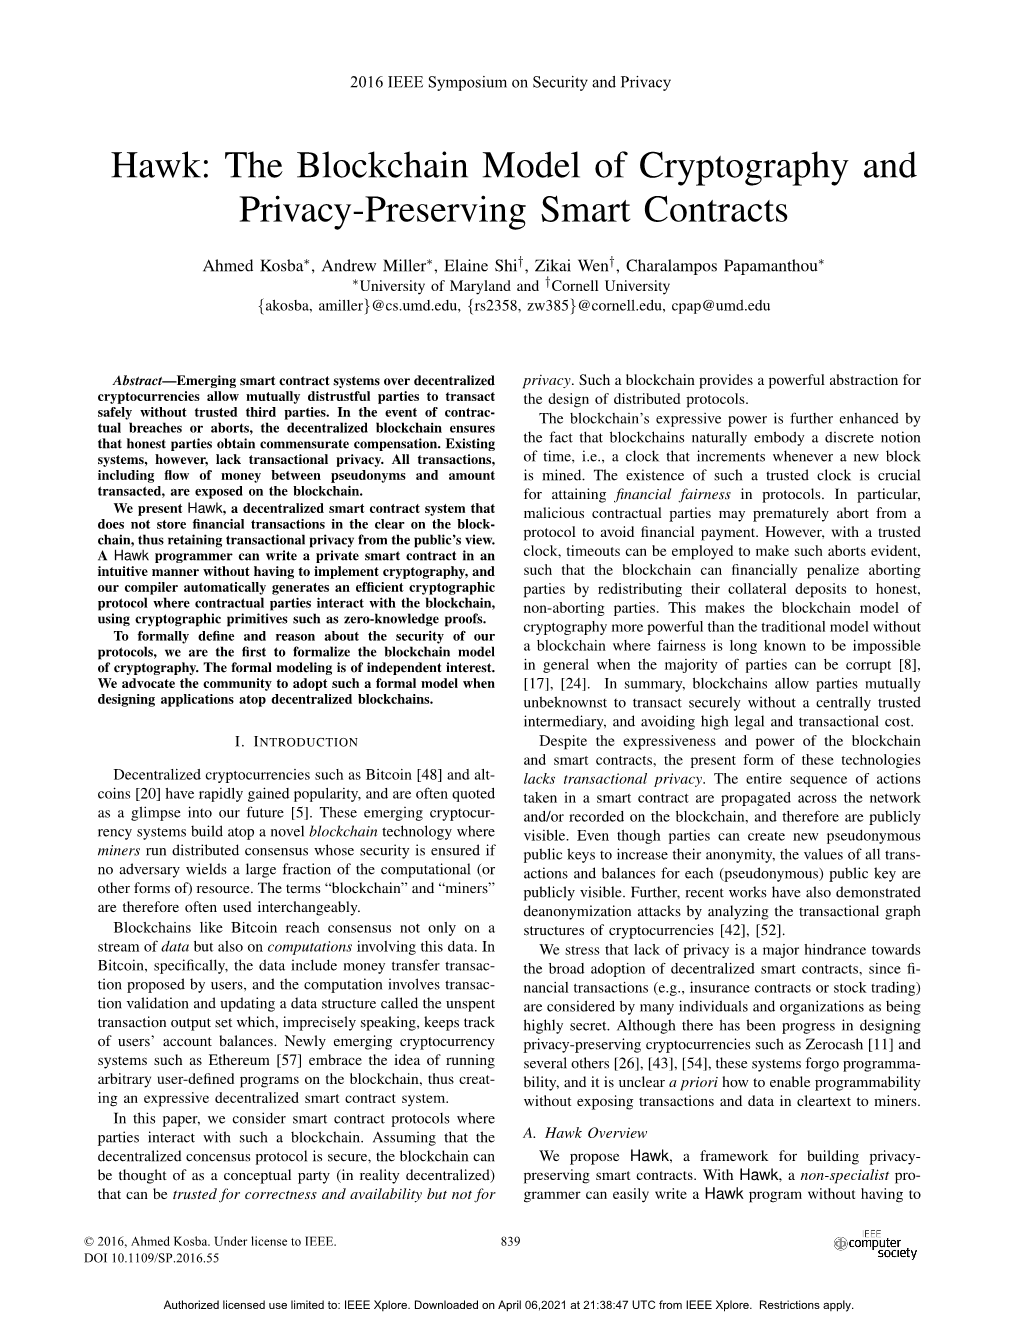 Hawk: the Blockchain Model of Cryptography and Privacy-Preserving Smart Contracts